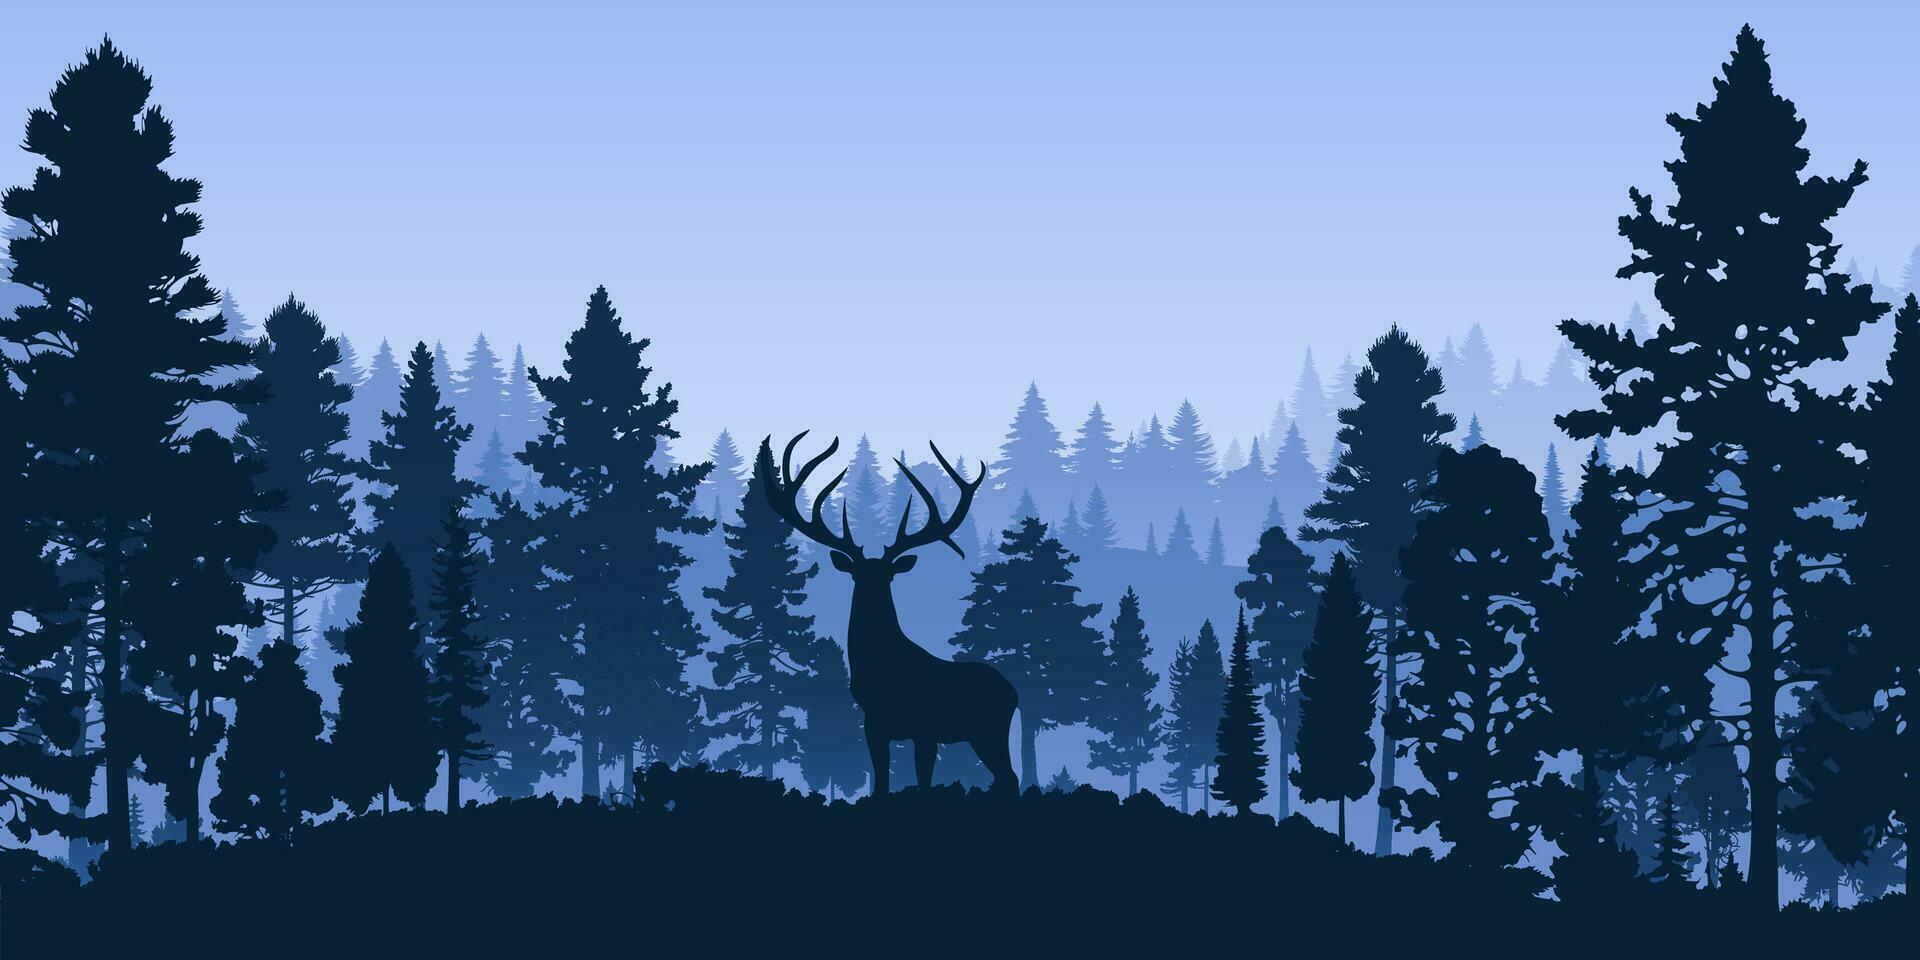 Forest landscape silhouette in blue hues. The coniferous trees and horned deer are in silhouette against a foggy horizon. For backgrounds, banners, travel and adventure designs vector